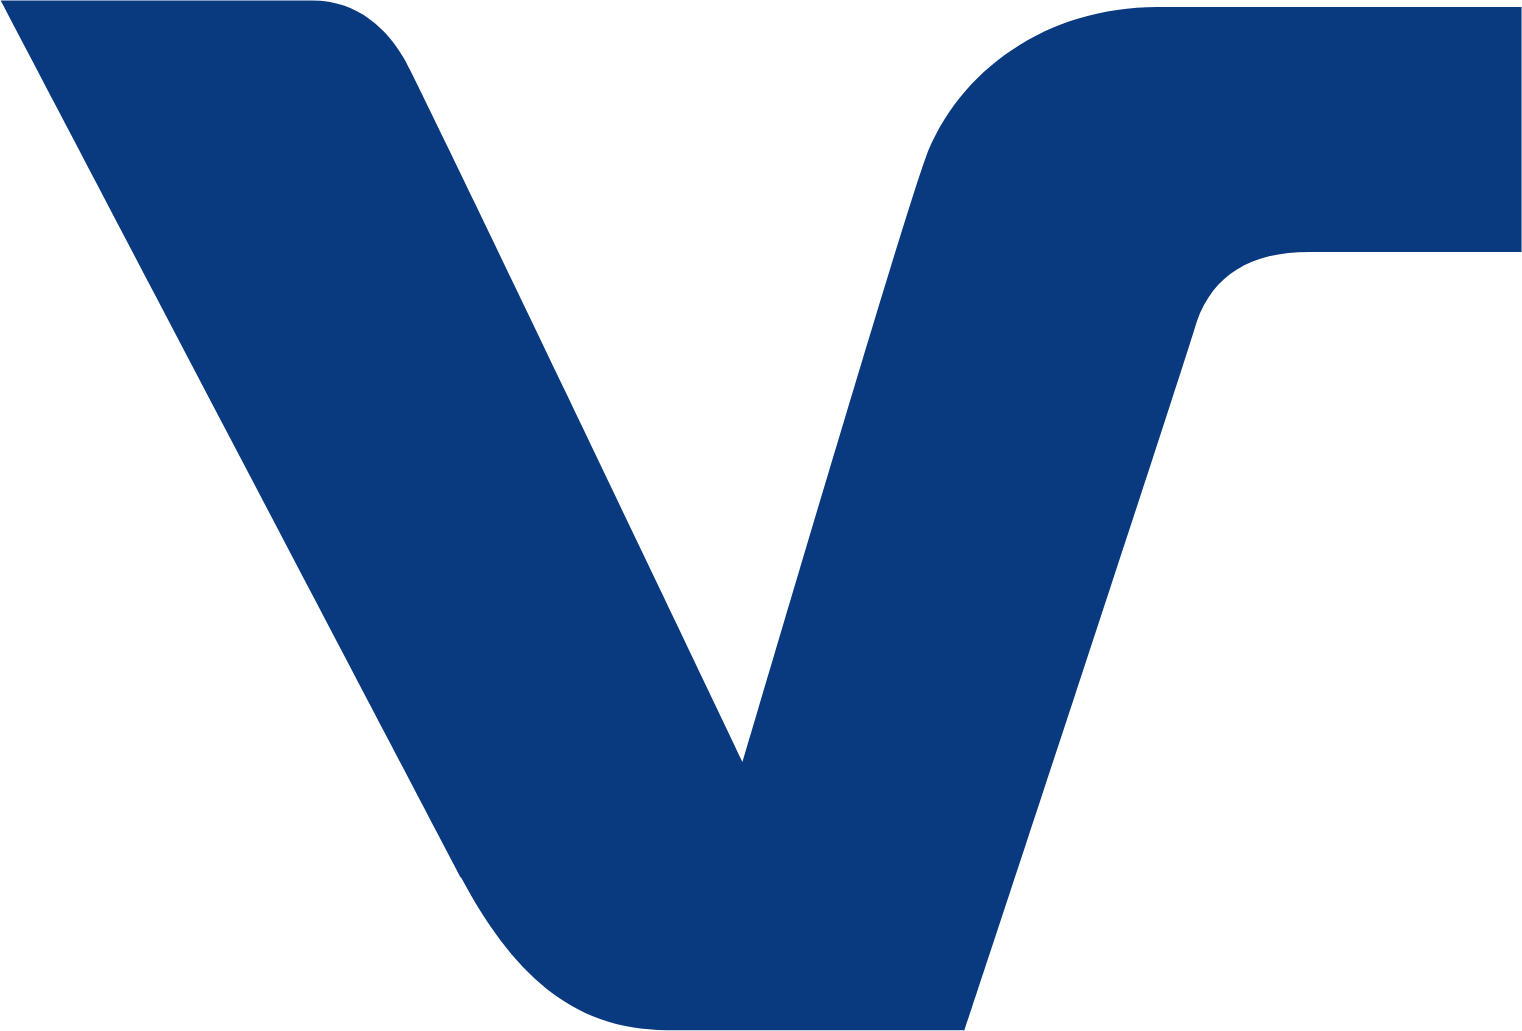 Vtech logo and symbol, meaning, history, PNG